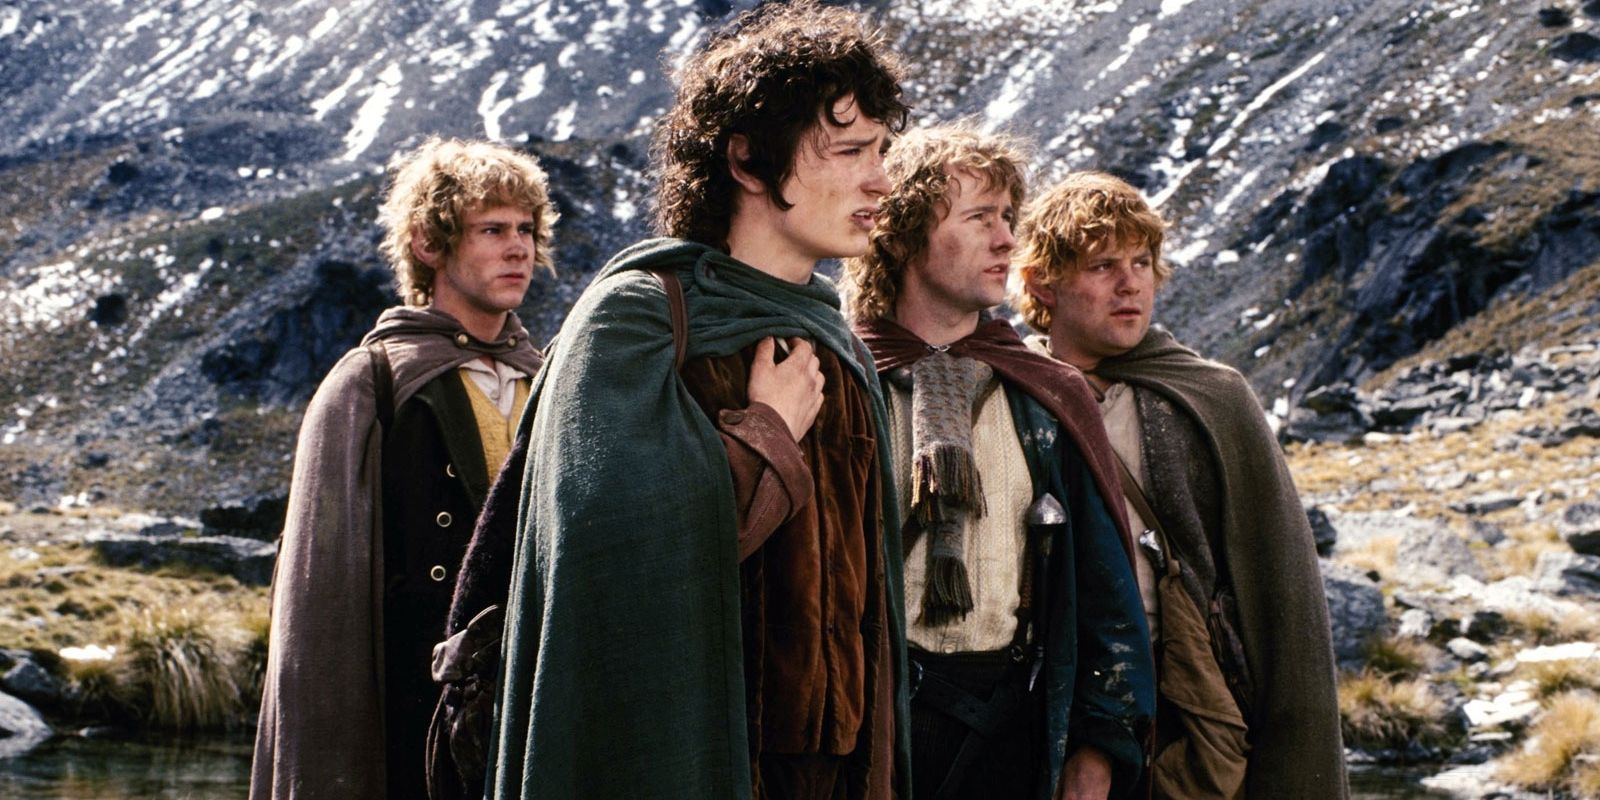 Actors from 'Lord of the Rings' reflect on the film 20 years later -  Deseret News